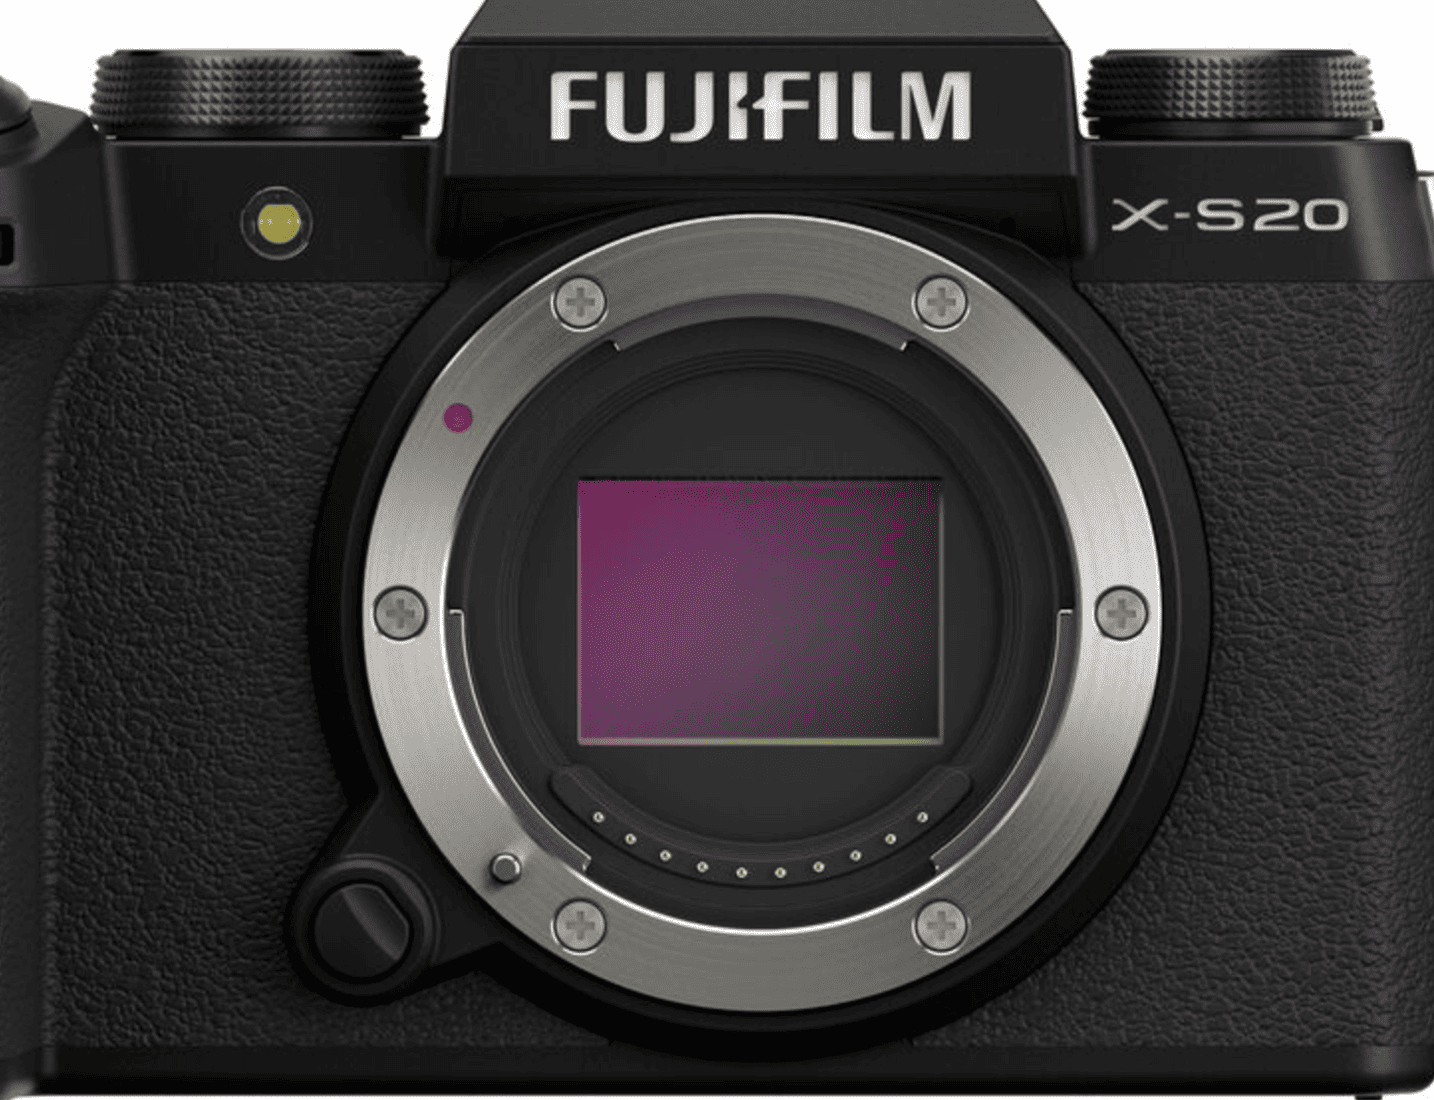 Fujifilm Launches X-S20 Mirrorless Camera, New Lens, and App